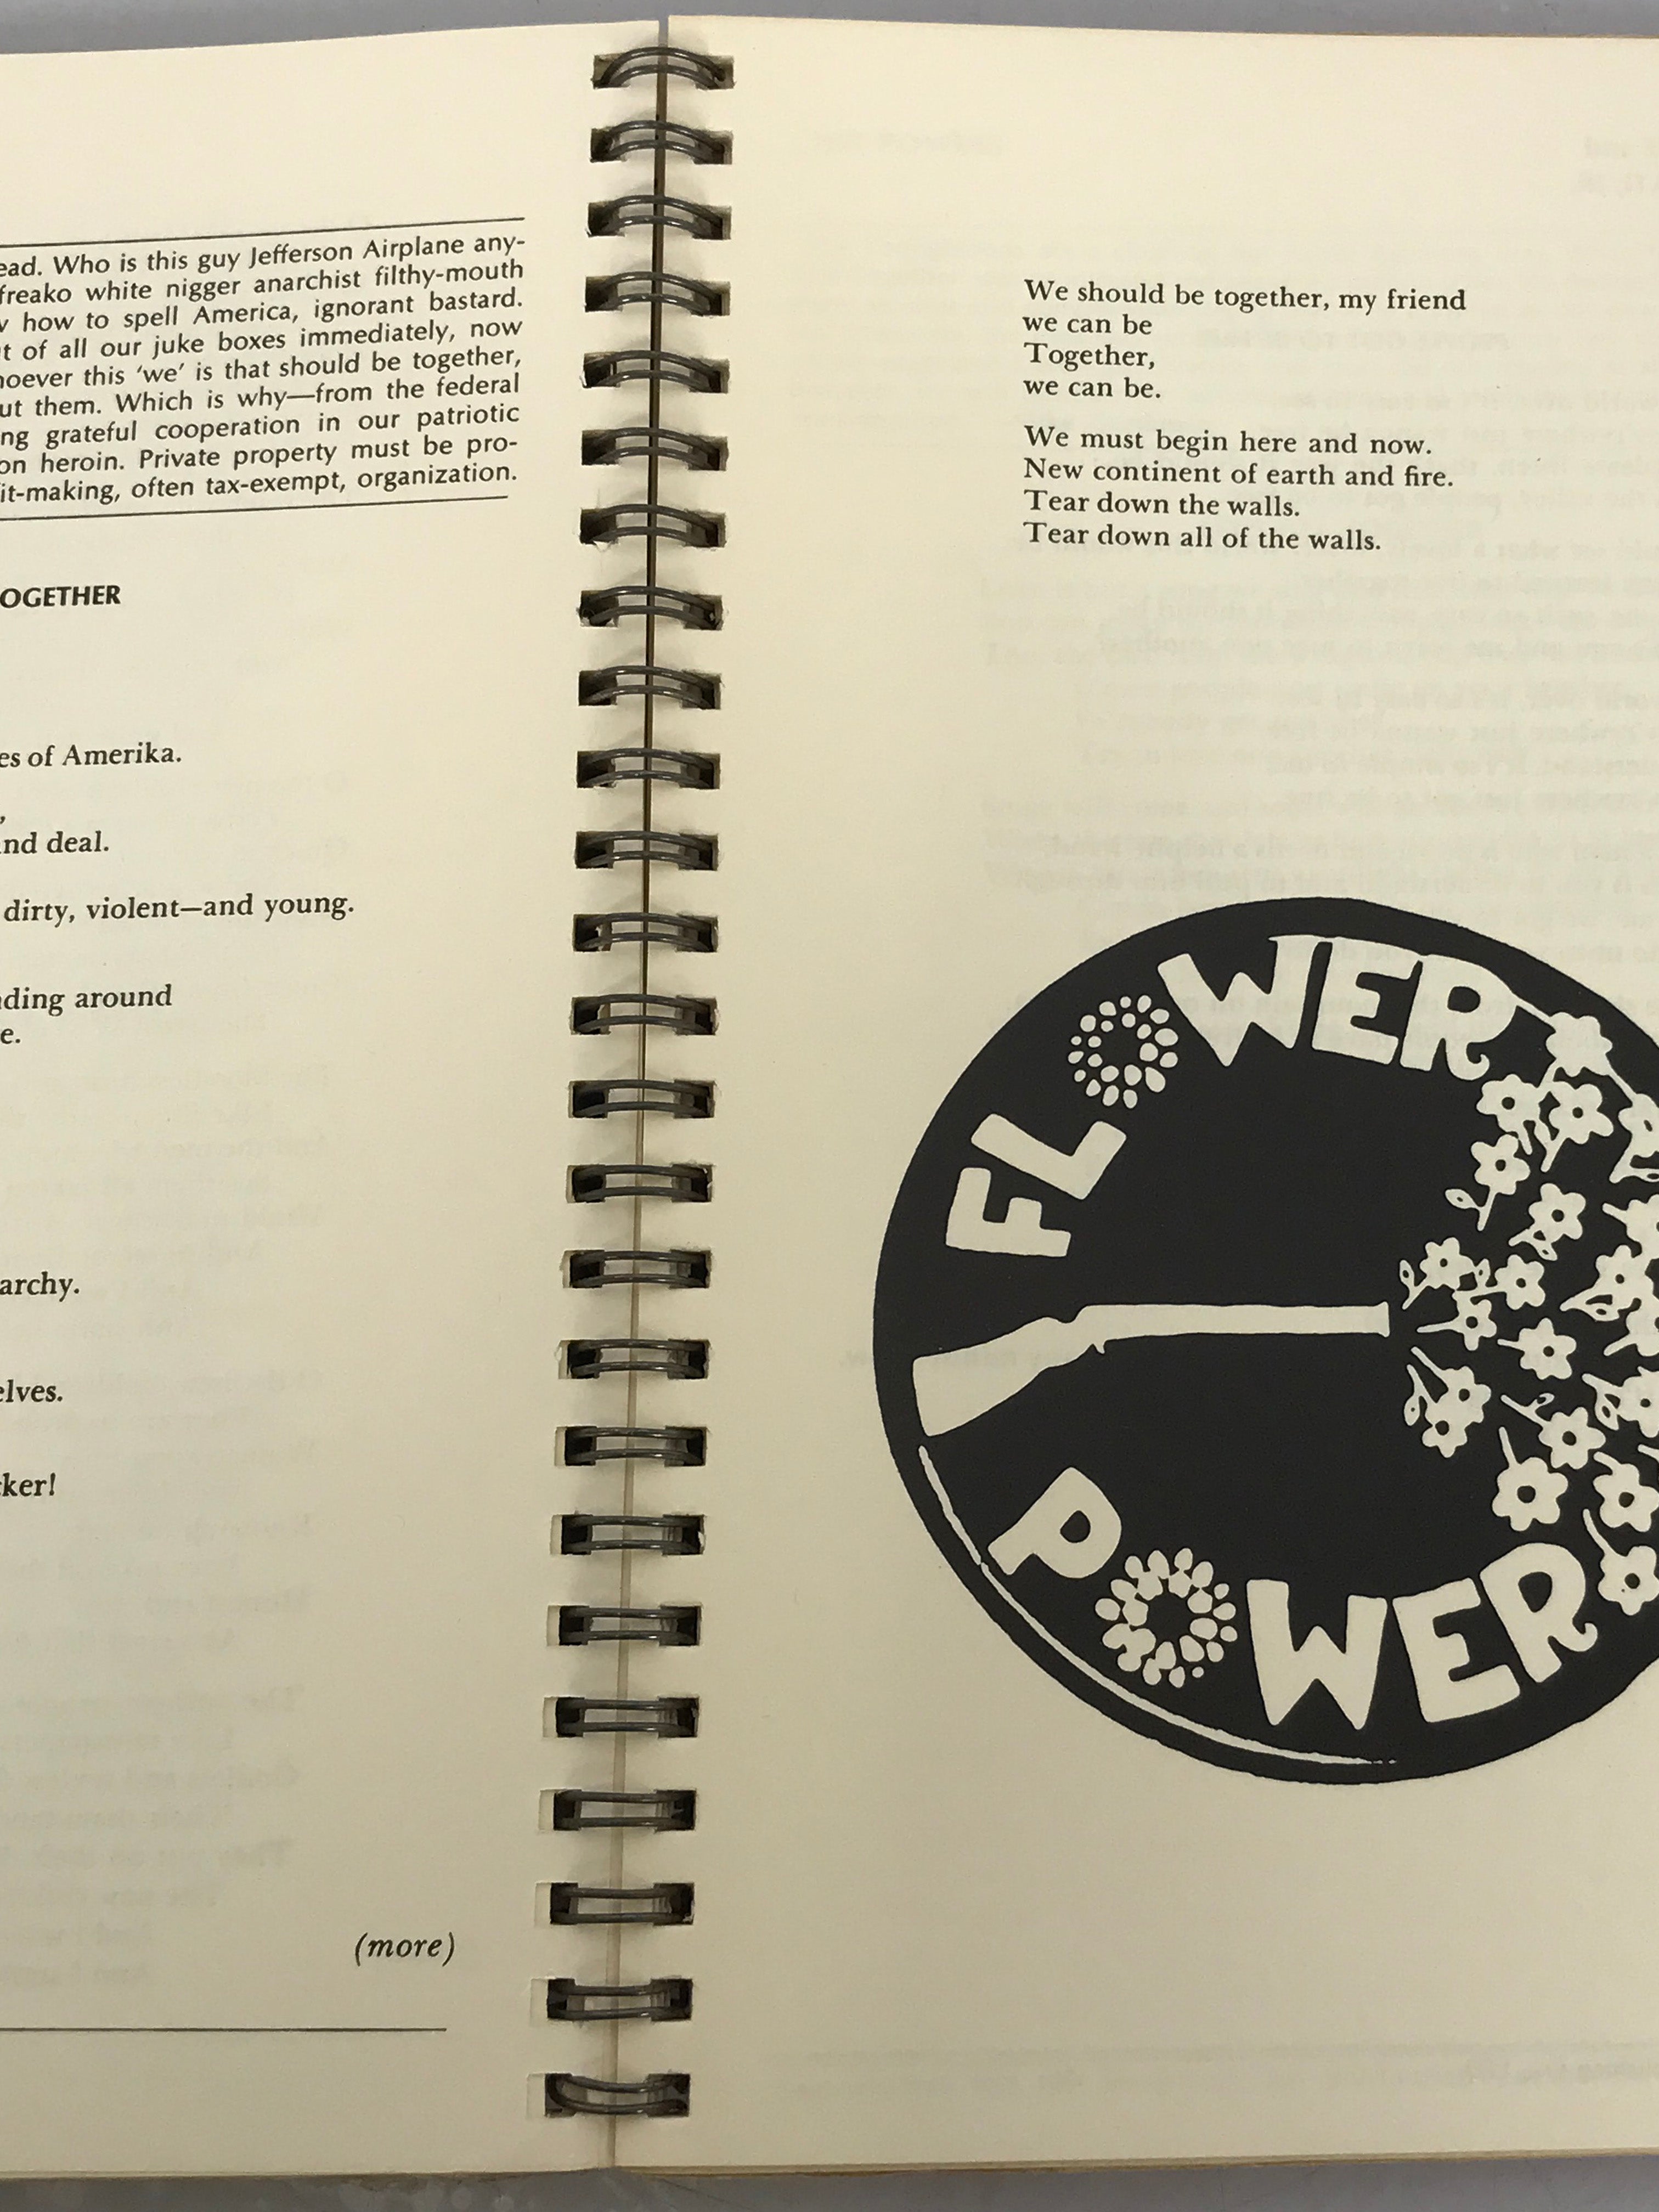 When the Mode of the Music Changes an Anthology of Rock 'n' Roll Lyrics with a Forward by Pete Seeger 1971 Spiral Bound